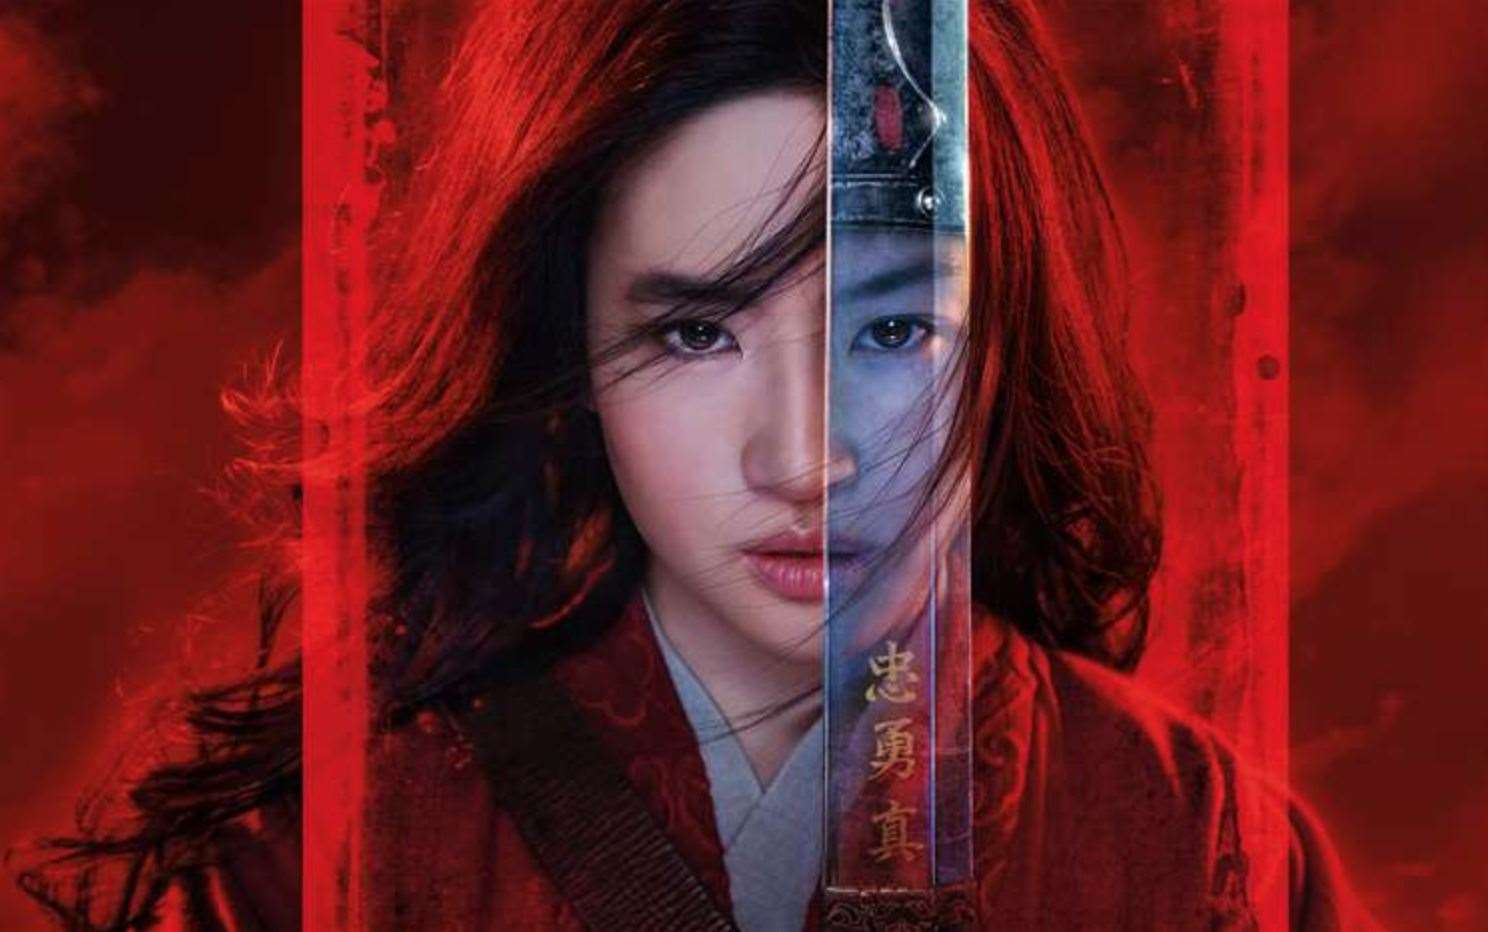 Disney's Mulan in 2020 was hit hard by the pandemic and was released on Disney+, at a premium, in the UK